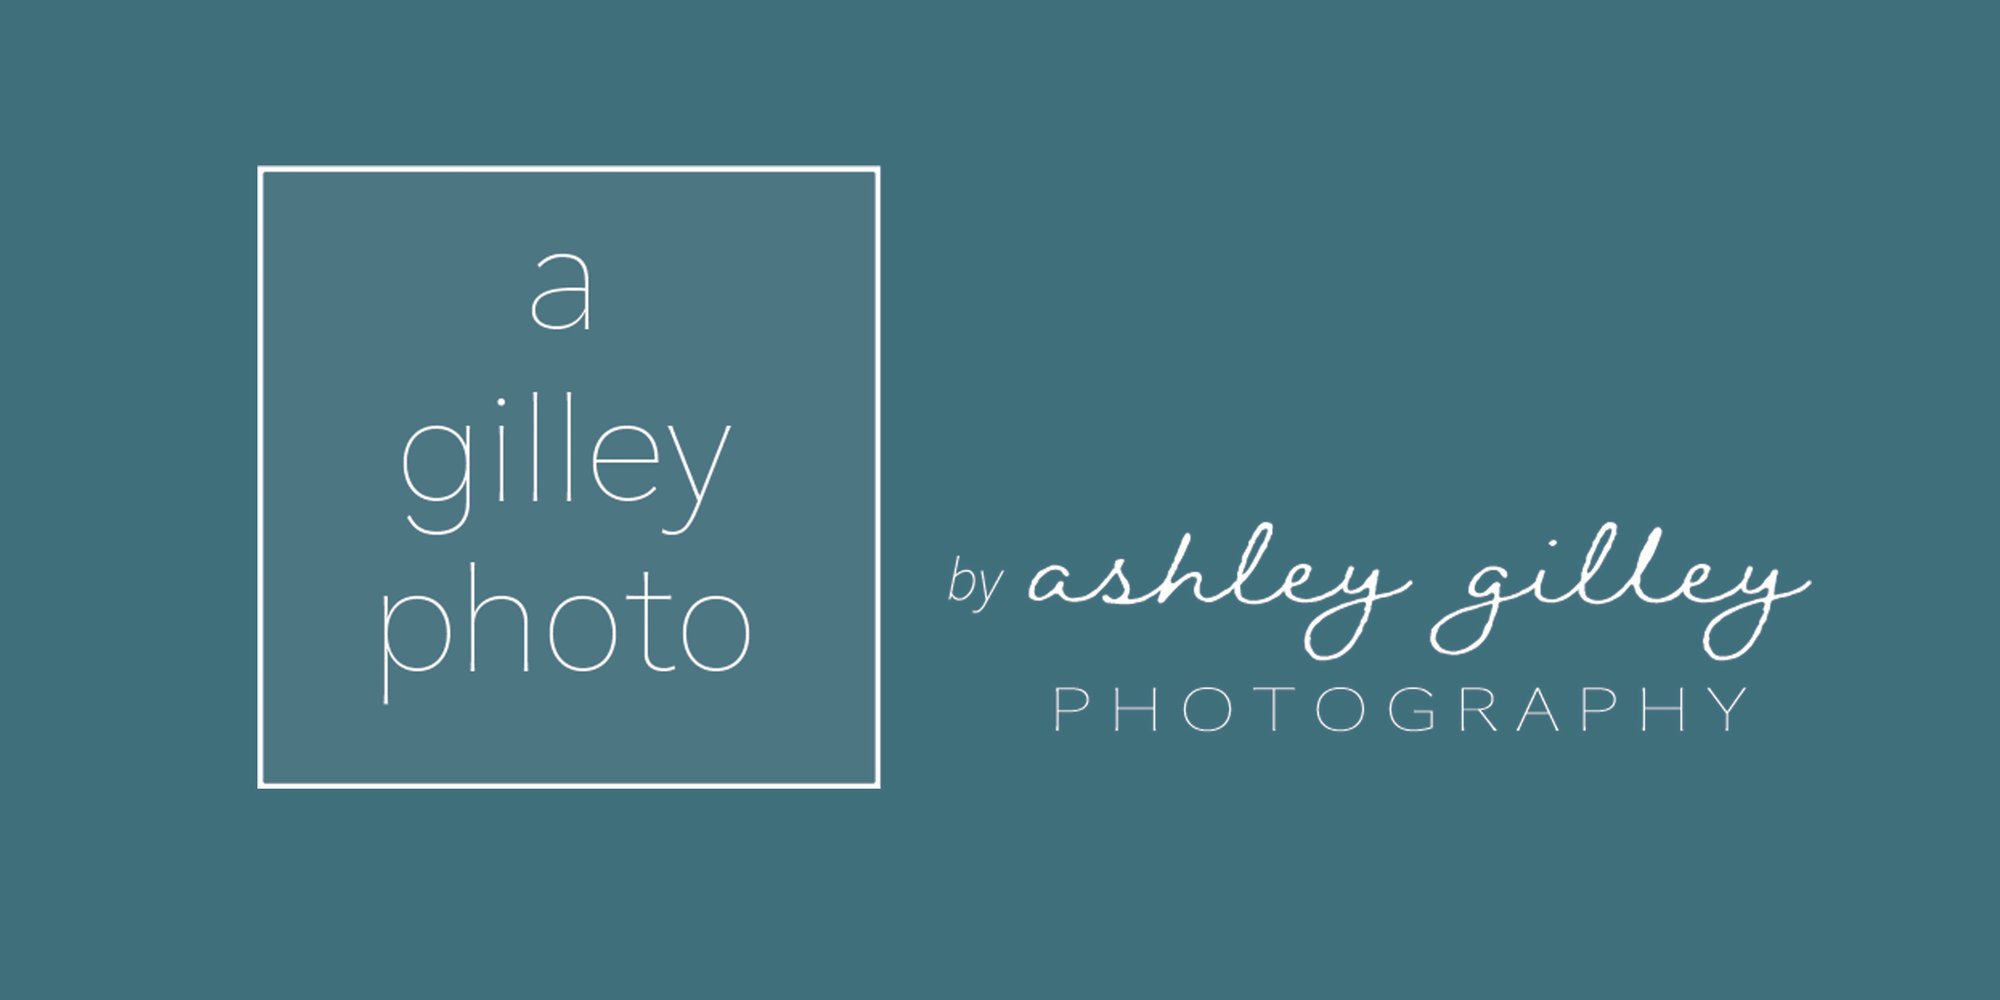 Welcome to Ashley Gilley Photography